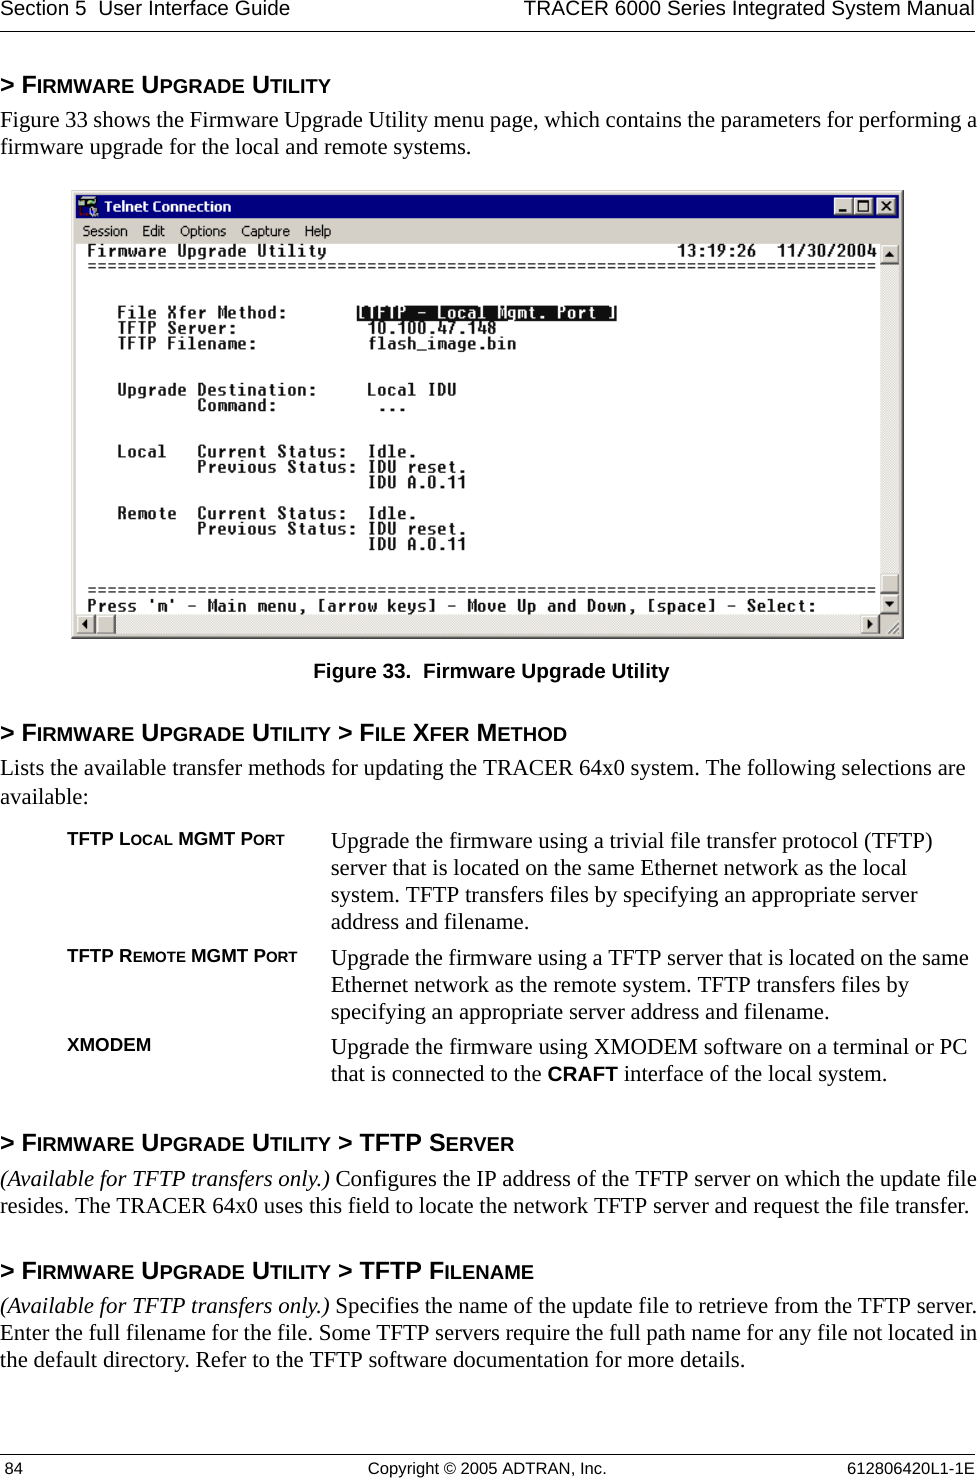 Section 5  User Interface Guide TRACER 6000 Series Integrated System Manual 84 Copyright © 2005 ADTRAN, Inc. 612806420L1-1E&gt; FIRMWARE UPGRADE UTILITYFigure 33 shows the Firmware Upgrade Utility menu page, which contains the parameters for performing a firmware upgrade for the local and remote systems. Figure 33.  Firmware Upgrade Utility&gt; FIRMWARE UPGRADE UTILITY &gt; FILE XFER METHODLists the available transfer methods for updating the TRACER 64x0 system. The following selections are available:&gt; FIRMWARE UPGRADE UTILITY &gt; TFTP SERVER(Available for TFTP transfers only.) Configures the IP address of the TFTP server on which the update file resides. The TRACER 64x0 uses this field to locate the network TFTP server and request the file transfer.&gt; FIRMWARE UPGRADE UTILITY &gt; TFTP FILENAME(Available for TFTP transfers only.) Specifies the name of the update file to retrieve from the TFTP server. Enter the full filename for the file. Some TFTP servers require the full path name for any file not located in the default directory. Refer to the TFTP software documentation for more details.TFTP LOCAL MGMT PORT Upgrade the firmware using a trivial file transfer protocol (TFTP) server that is located on the same Ethernet network as the local system. TFTP transfers files by specifying an appropriate server address and filename.TFTP REMOTE MGMT PORT Upgrade the firmware using a TFTP server that is located on the same Ethernet network as the remote system. TFTP transfers files by specifying an appropriate server address and filename.XMODEM Upgrade the firmware using XMODEM software on a terminal or PC that is connected to the CRAFT interface of the local system. 